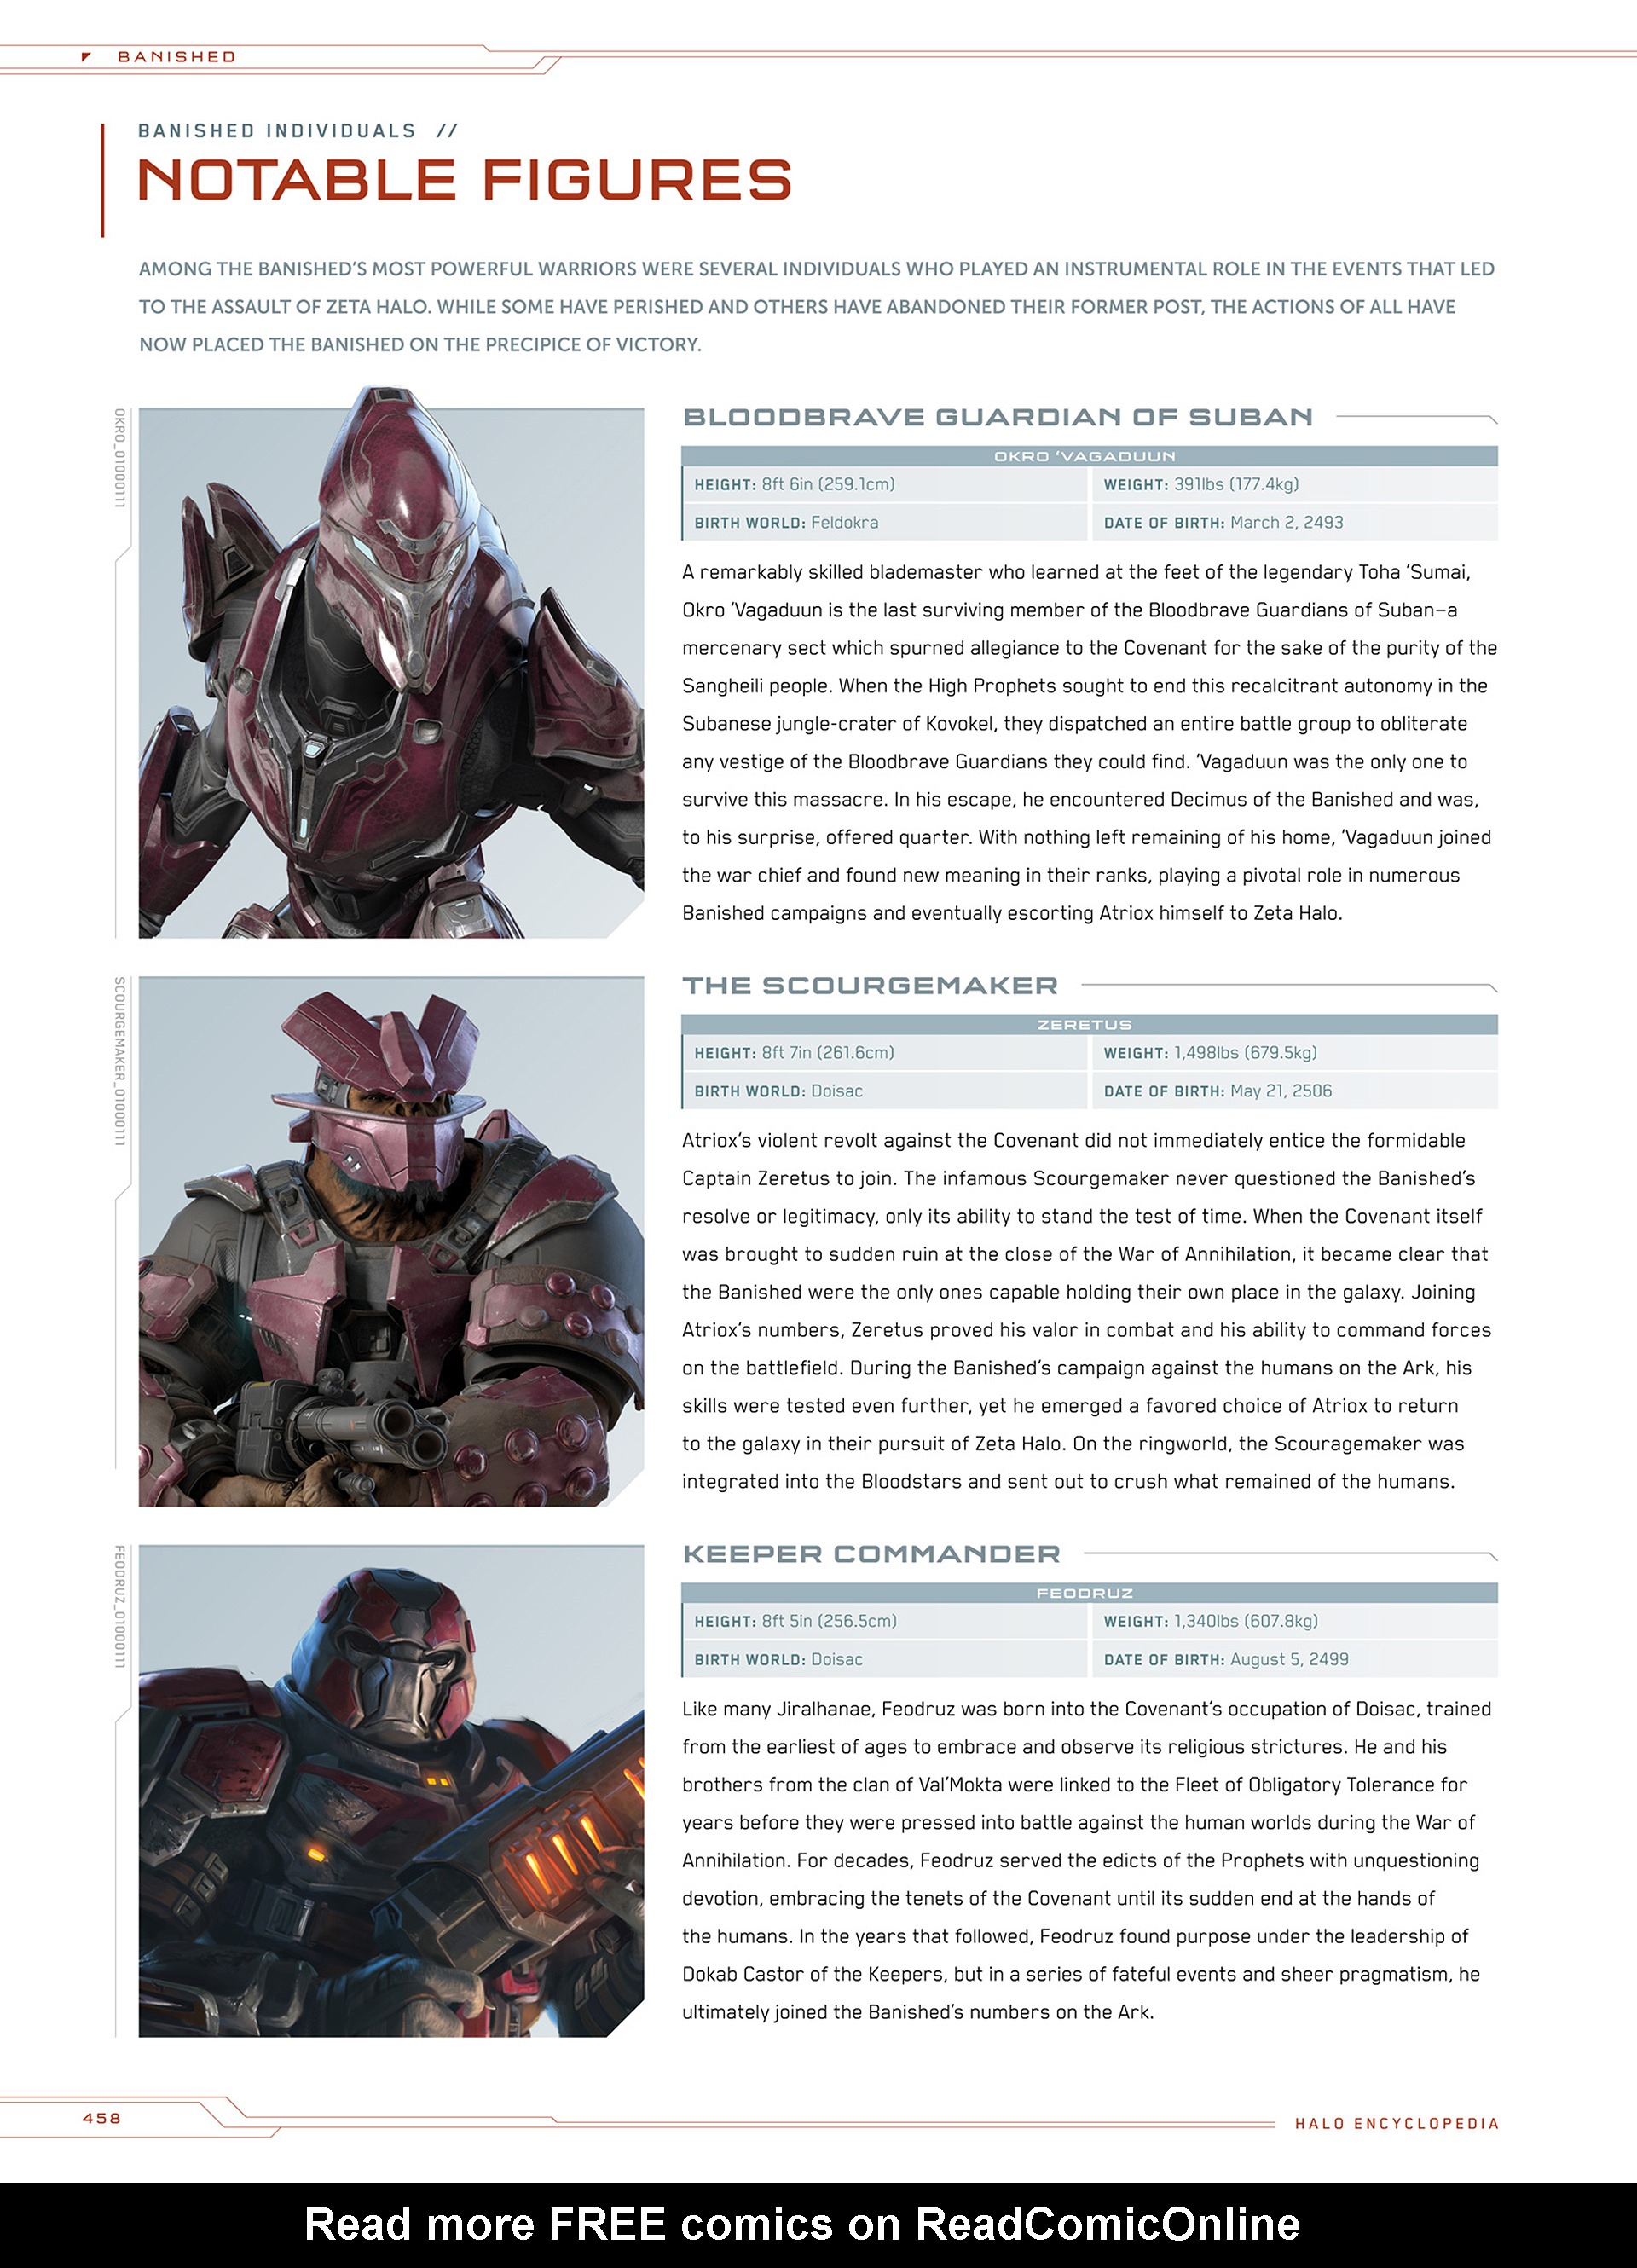 Read online Halo Encyclopedia comic -  Issue # TPB (Part 5) - 51